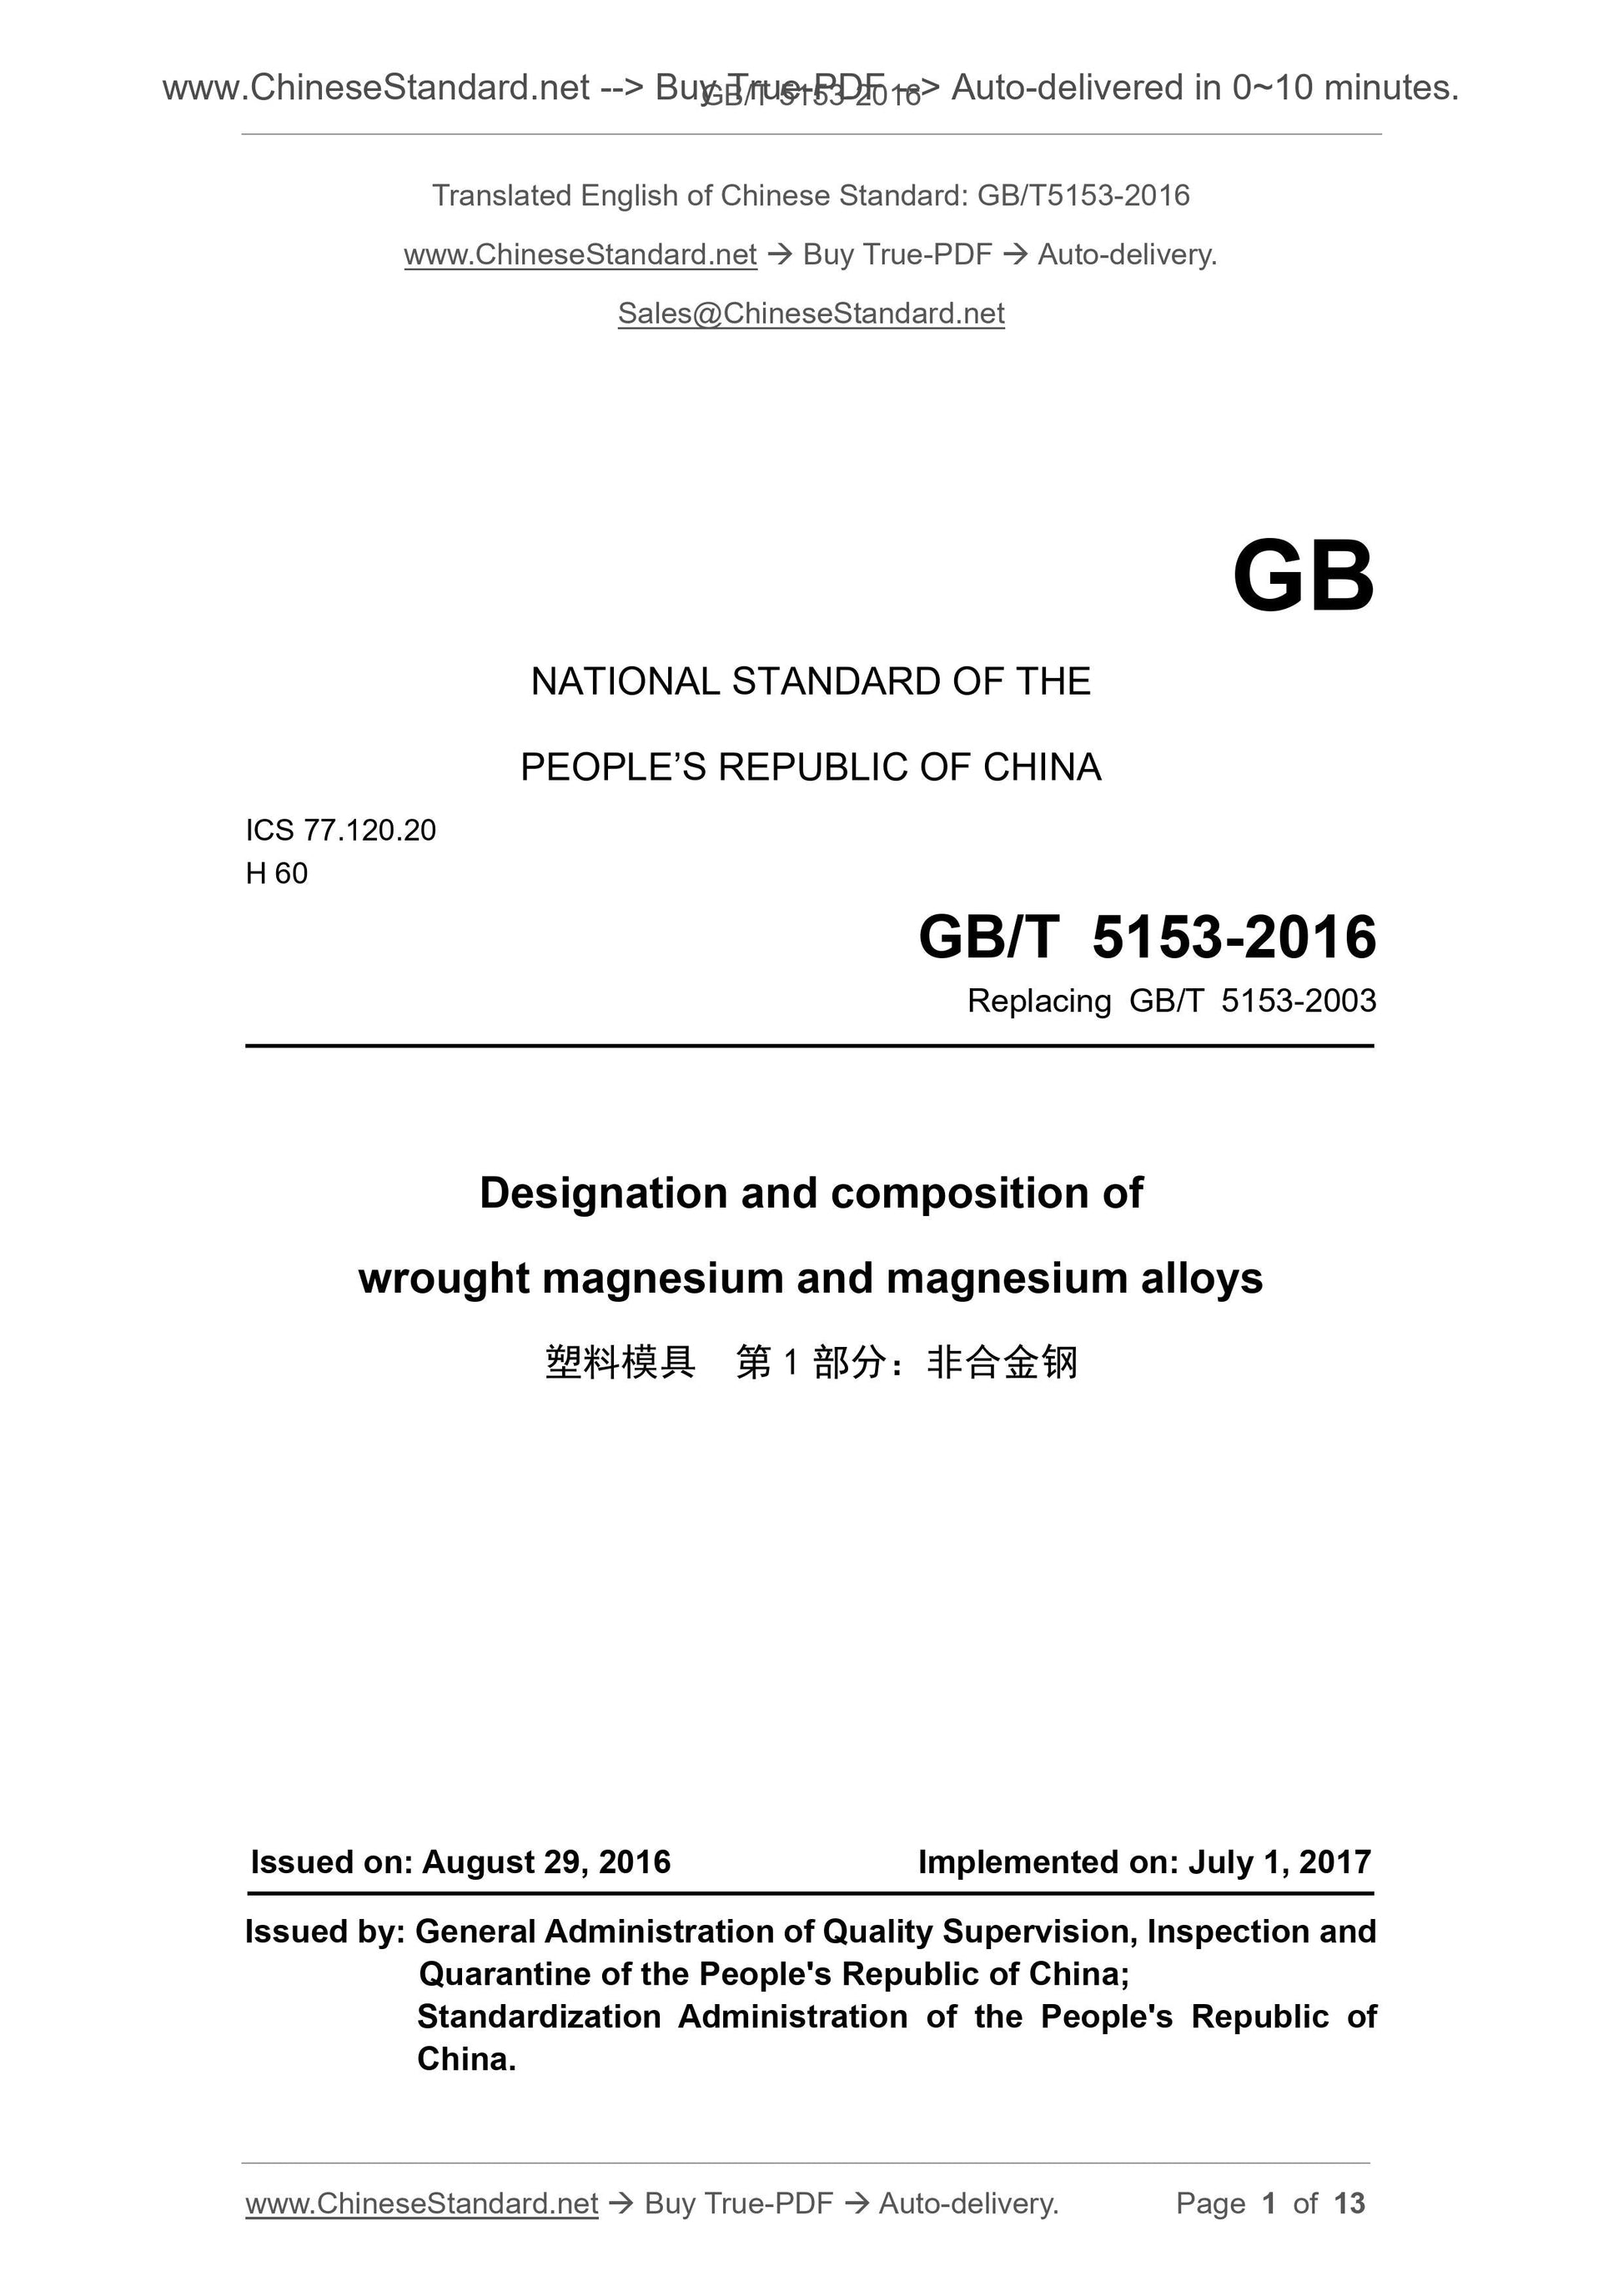 GB/T 5153-2016 Page 1